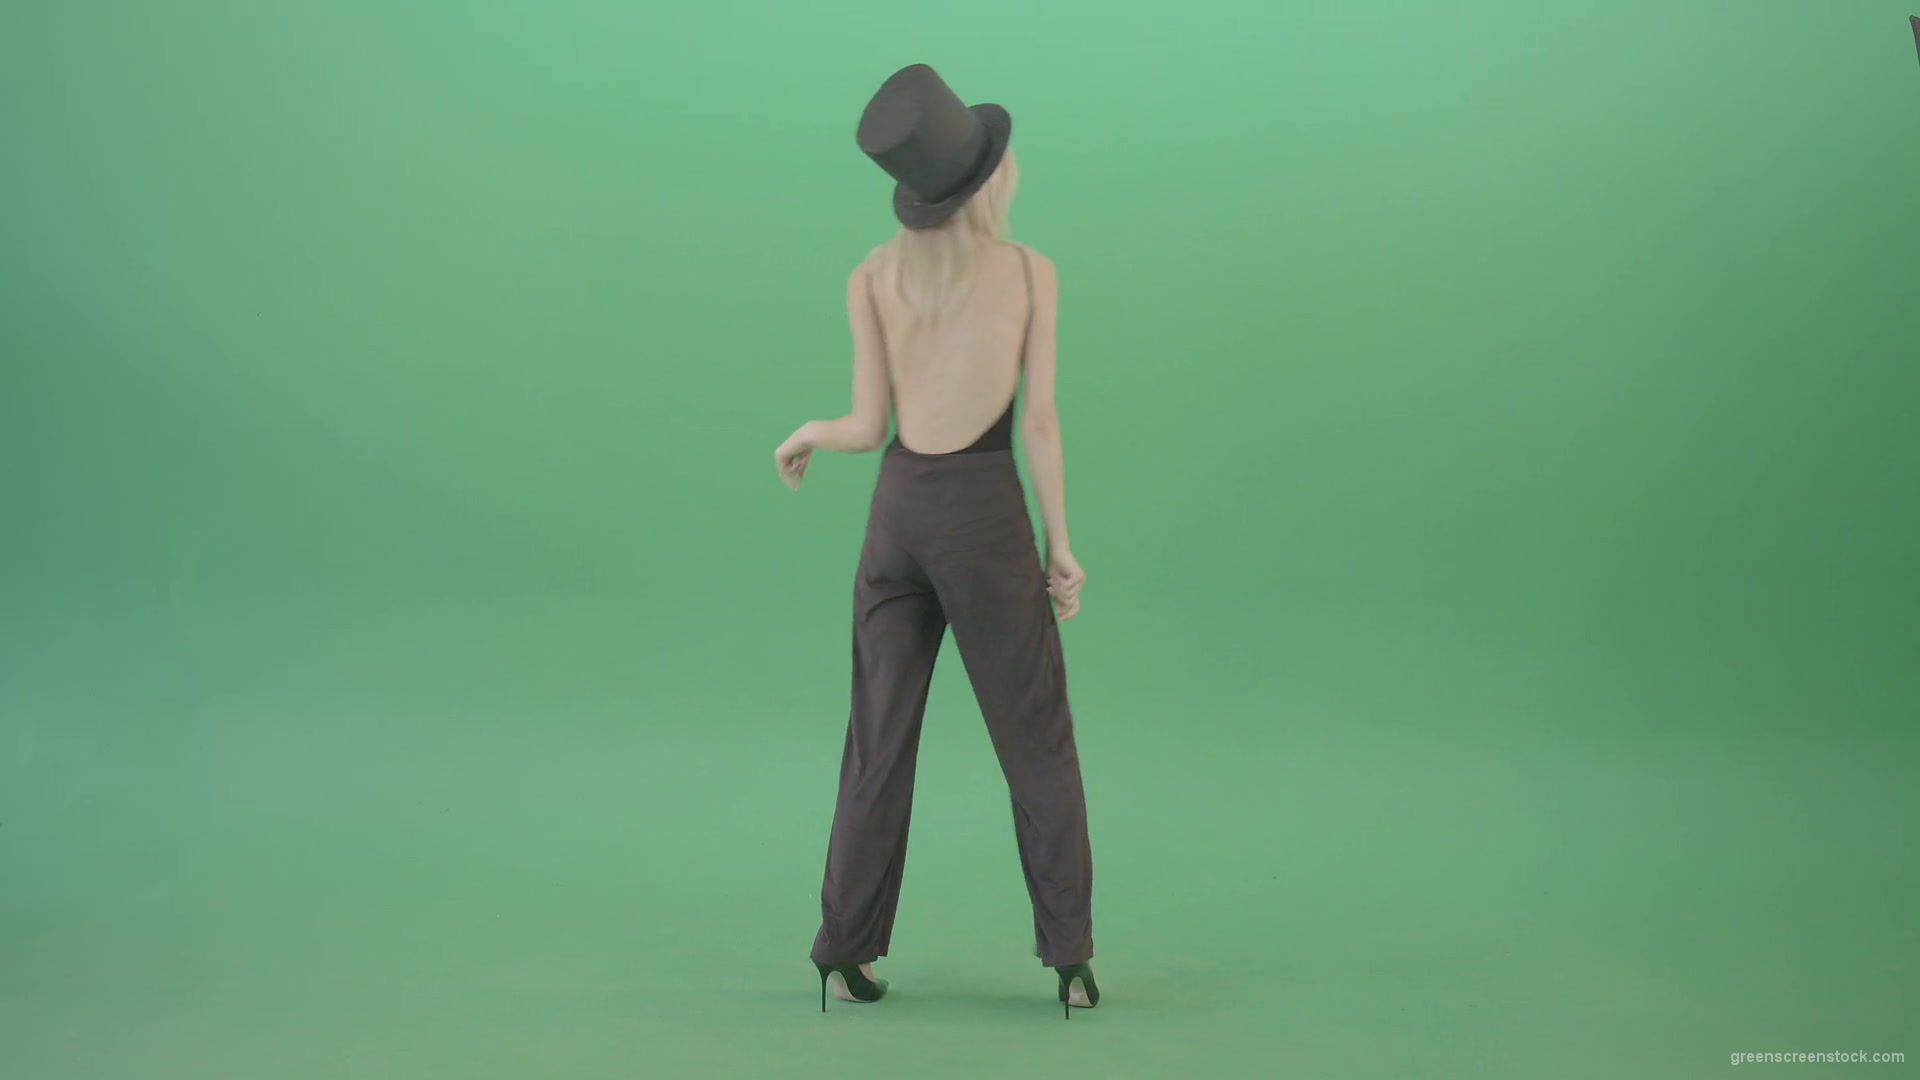 Covid-Mask-Girl-in-Black-cylinder-Hat-dancing-in-front-and-back-side-view-isolated-on-green-screen-Video-Footage-1920_009 Green Screen Stock